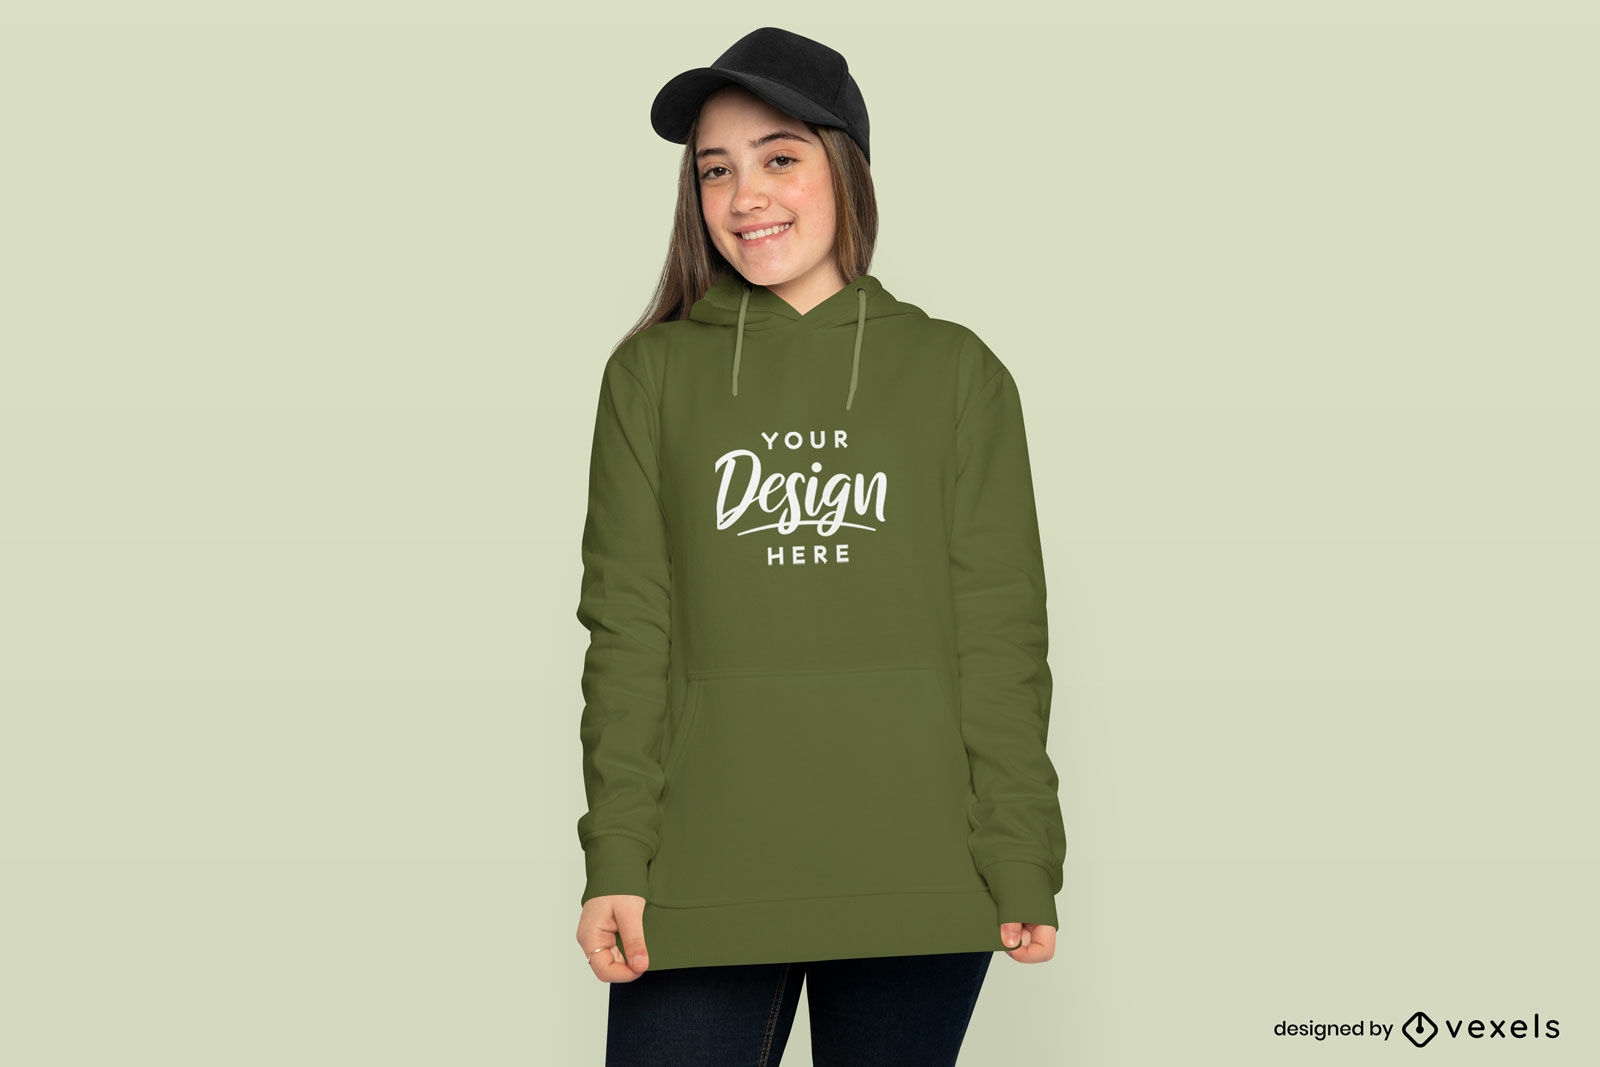 Girl with cap hat and hoodie mockup